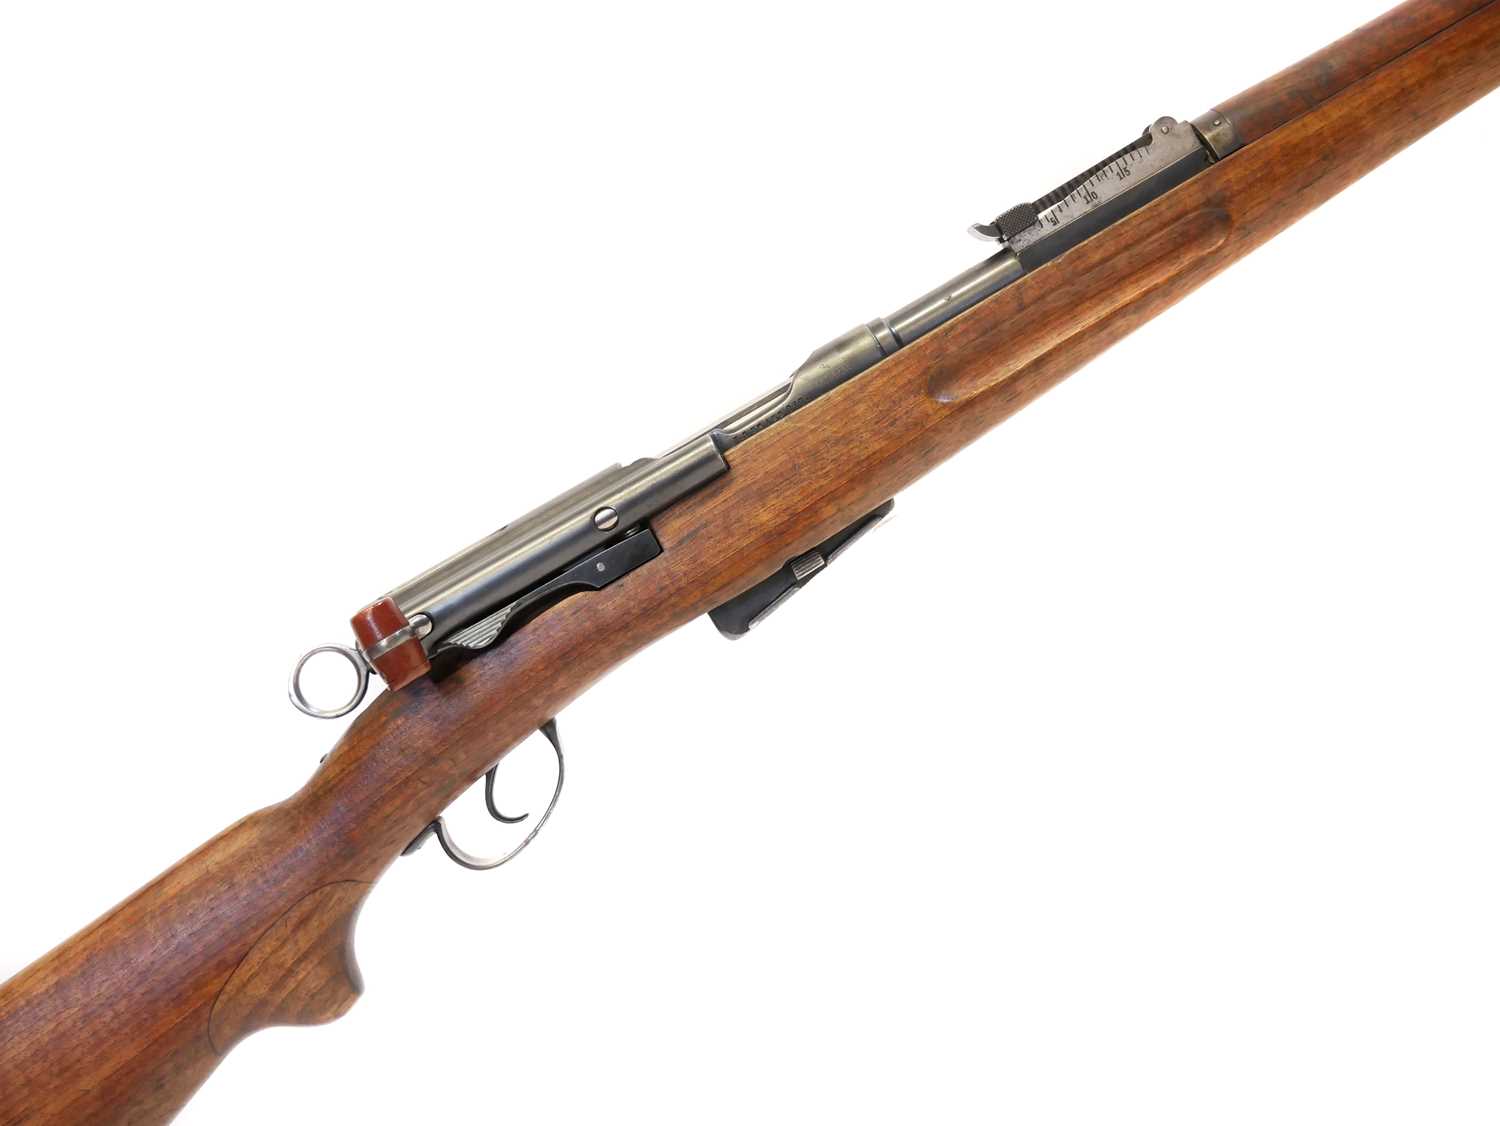 Schmidt Rubin 1896 7.5mm straight pull rifle, matching serial numbers 268510 to barrel, receiver,